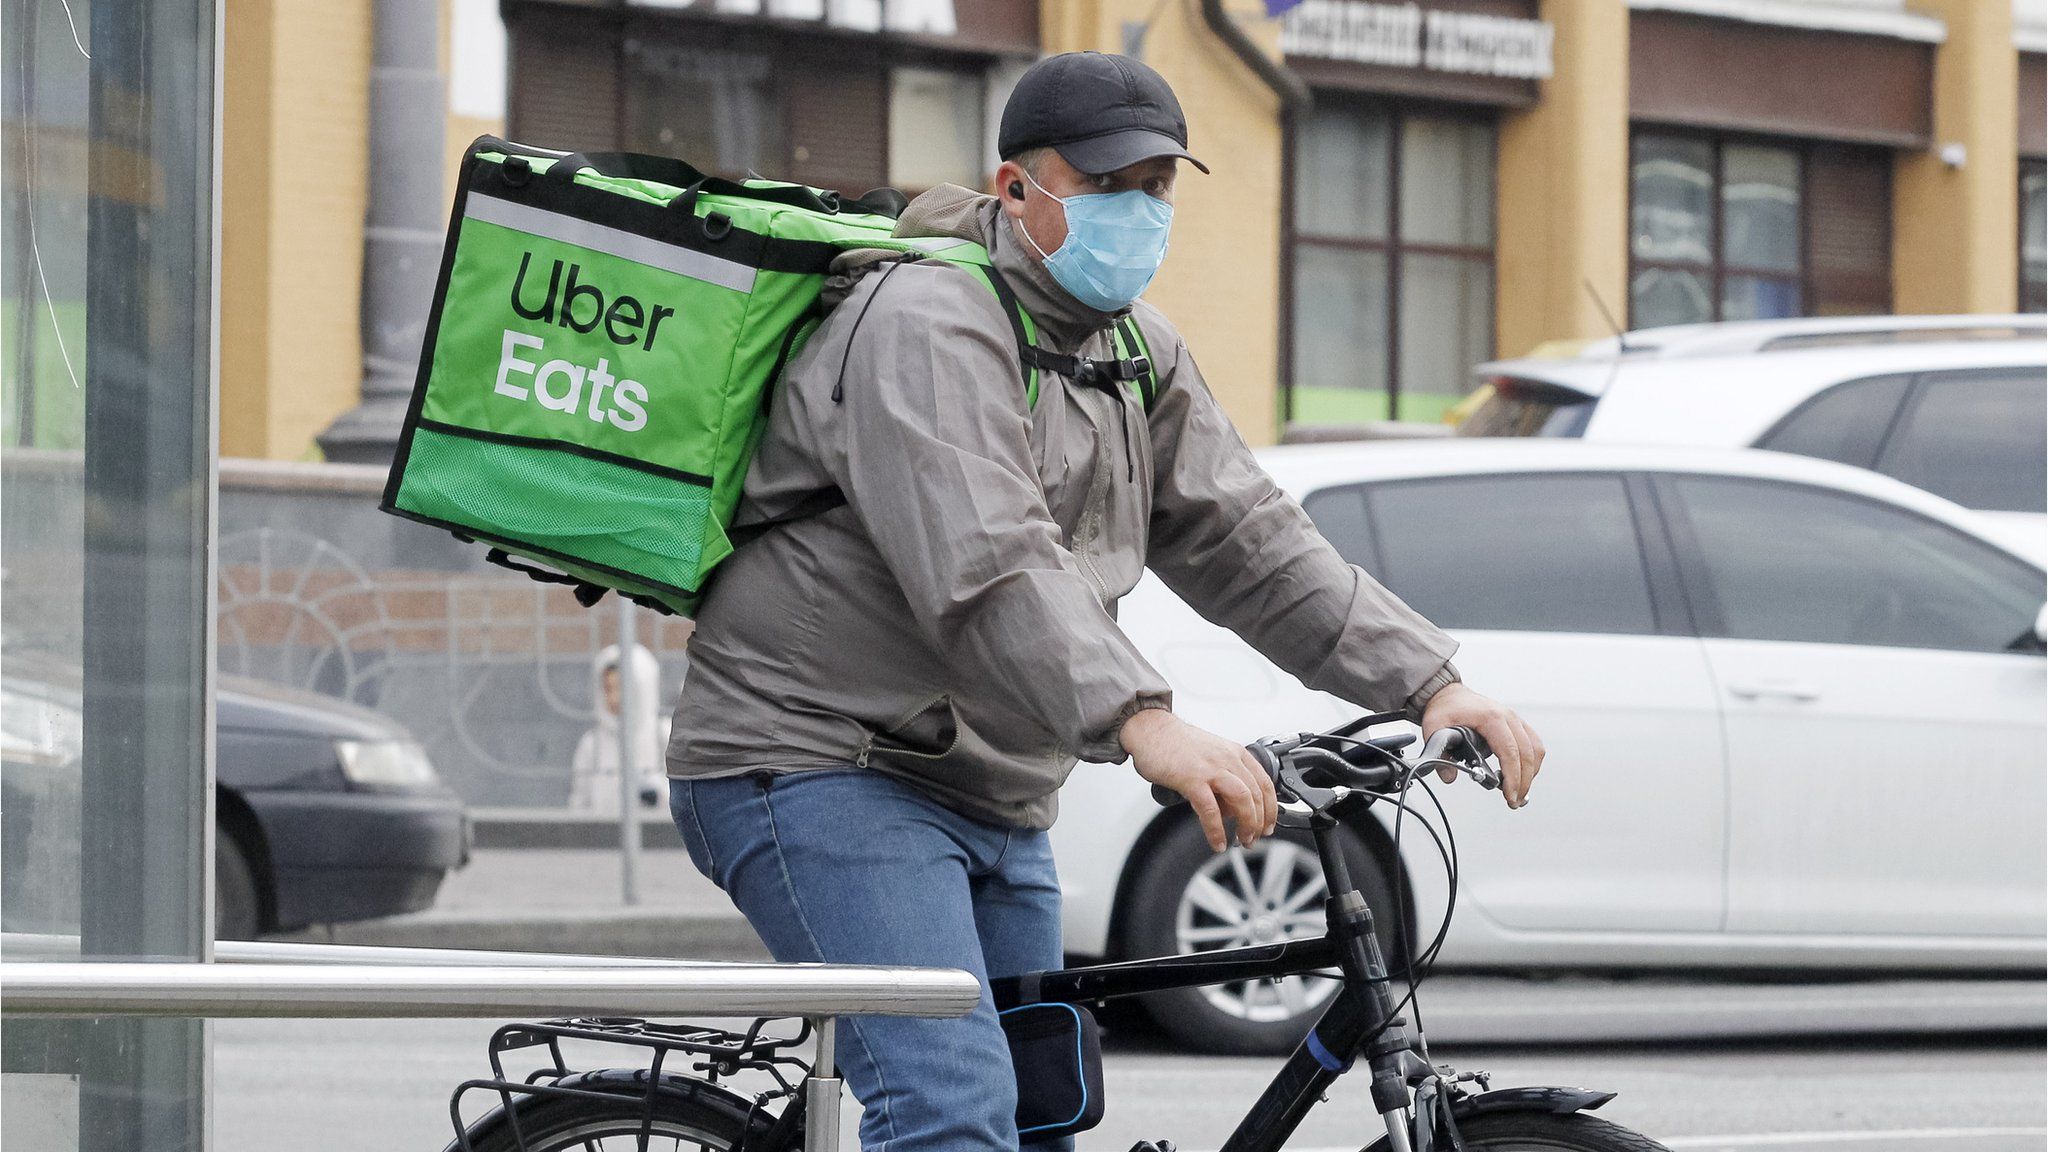 Uber Eats delivery